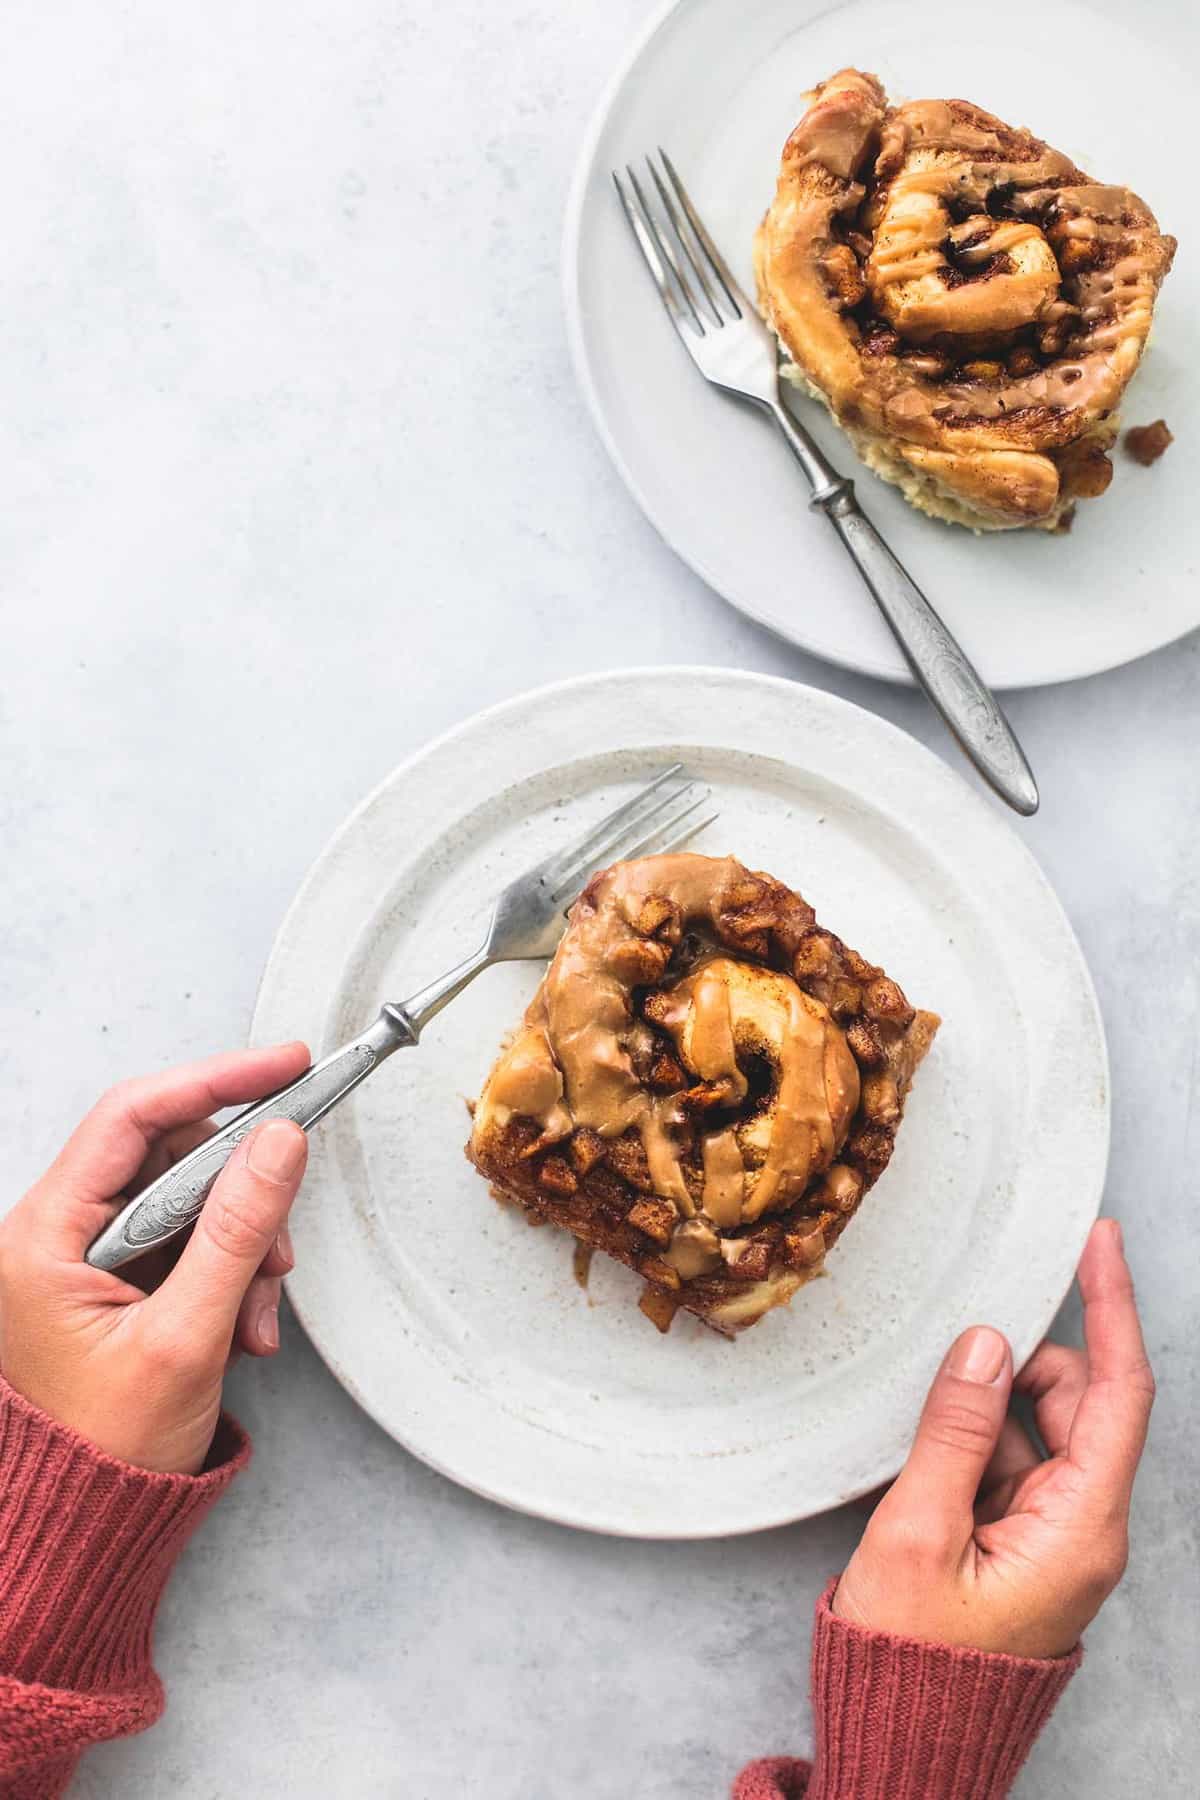 top view of a pair of hands holding a plate with a apple pie cinnamon roll on it with one hand and a fork with the other with another roll and fork on a plate on the side.